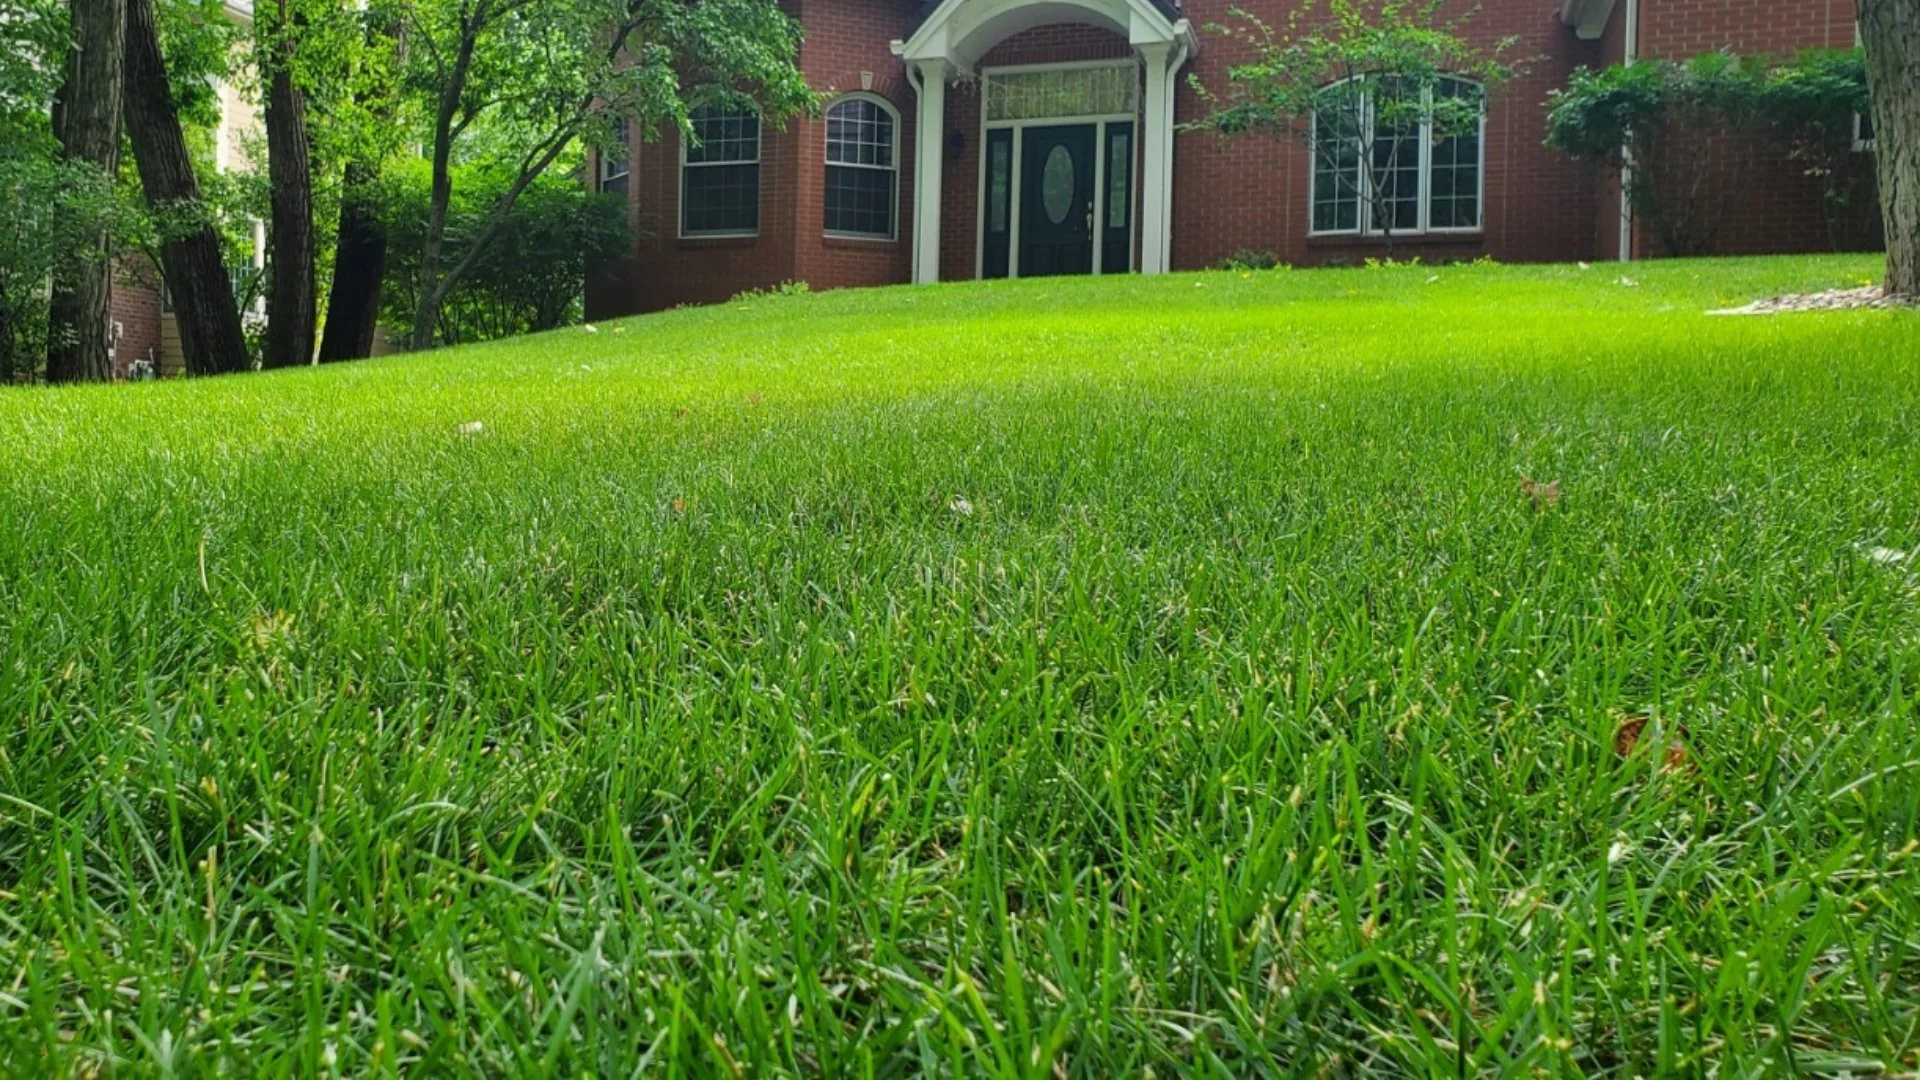 How Long Will It Take for a Fertilizer Treatment to Absorb Into a Lawn?